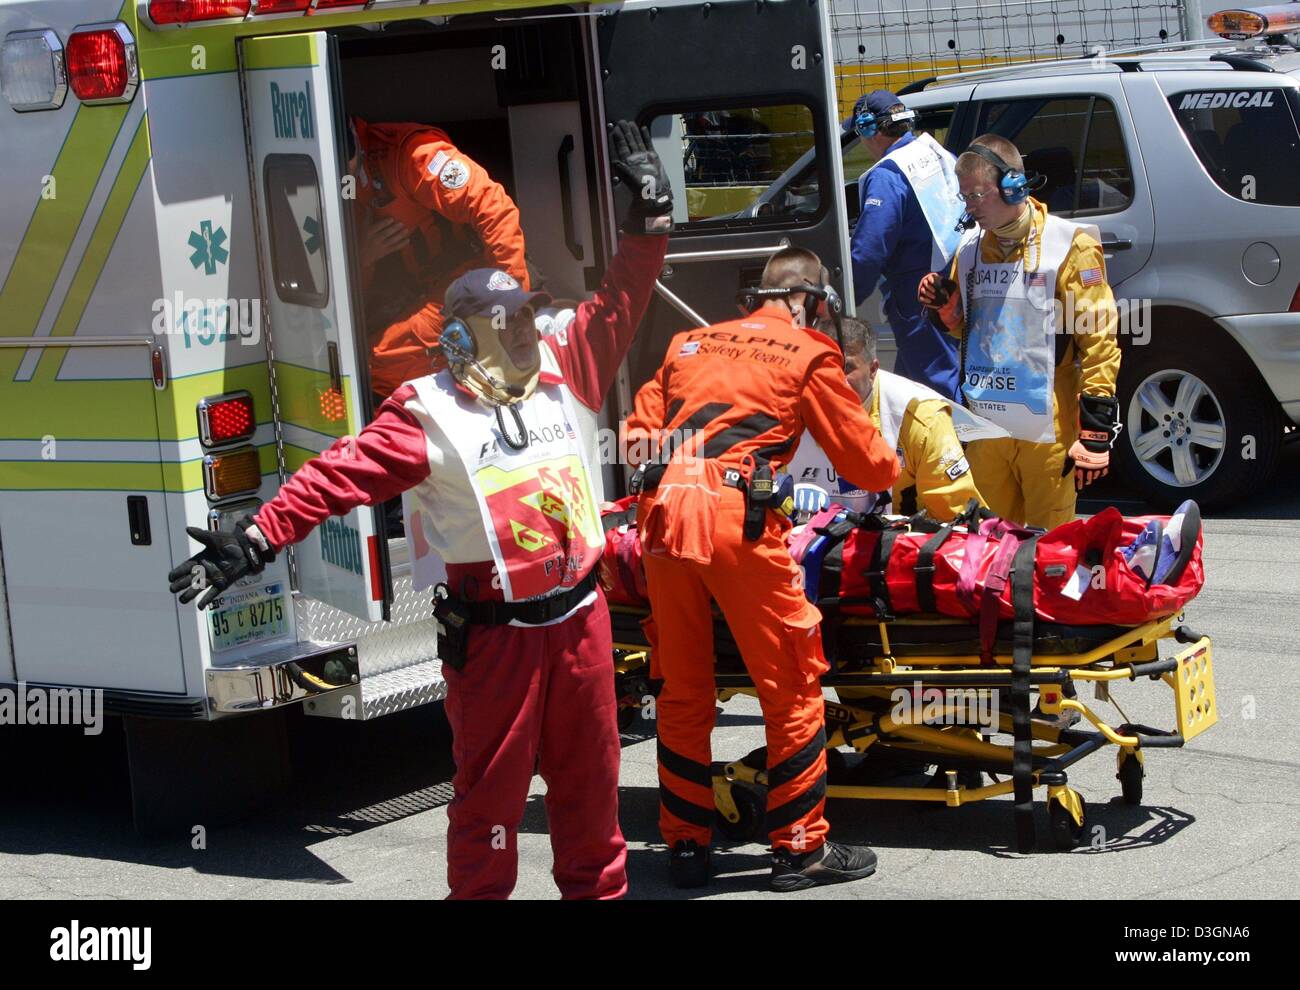 (dpa) - Paramedics and members of the safety team take German formula one pilot Ralf Schumacher of BMW-Williams lying on a stretcher to an ambulance van after his accident during the US Grand Prix on the racetrack in Indianapolis, USA, 20 June 2004. Ralf Schumach ran with top speed of around 300 kilometres per hour into a barrier along the racetrack in the tenth lap of the race. Stock Photo